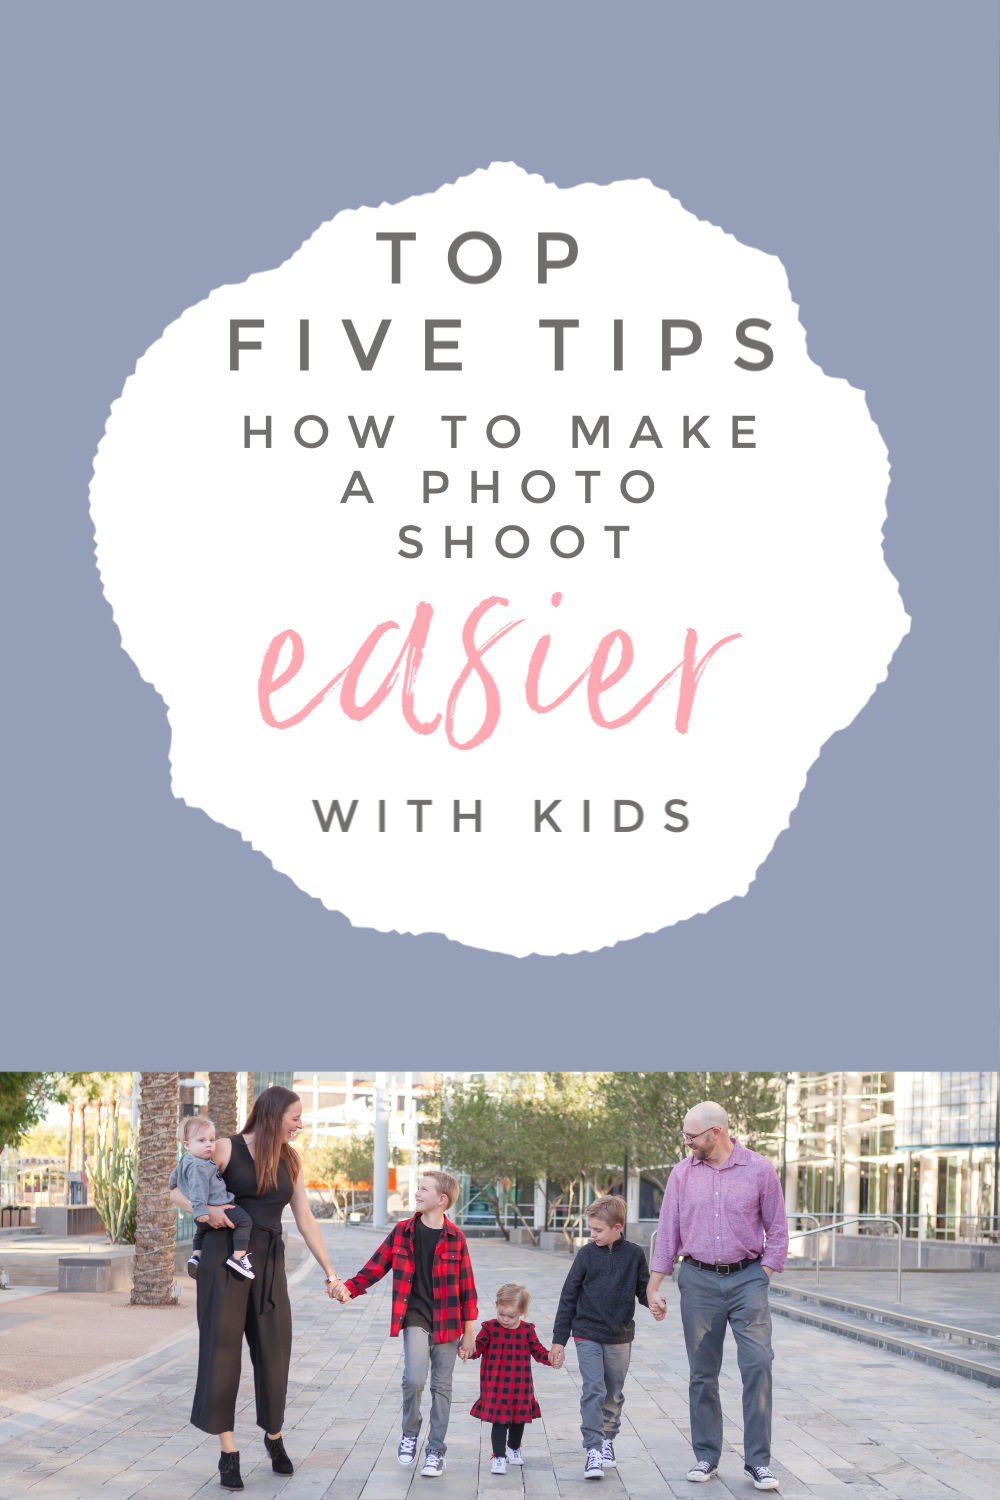 Top 5 Tips for Making a Photo Session with Kids Easier